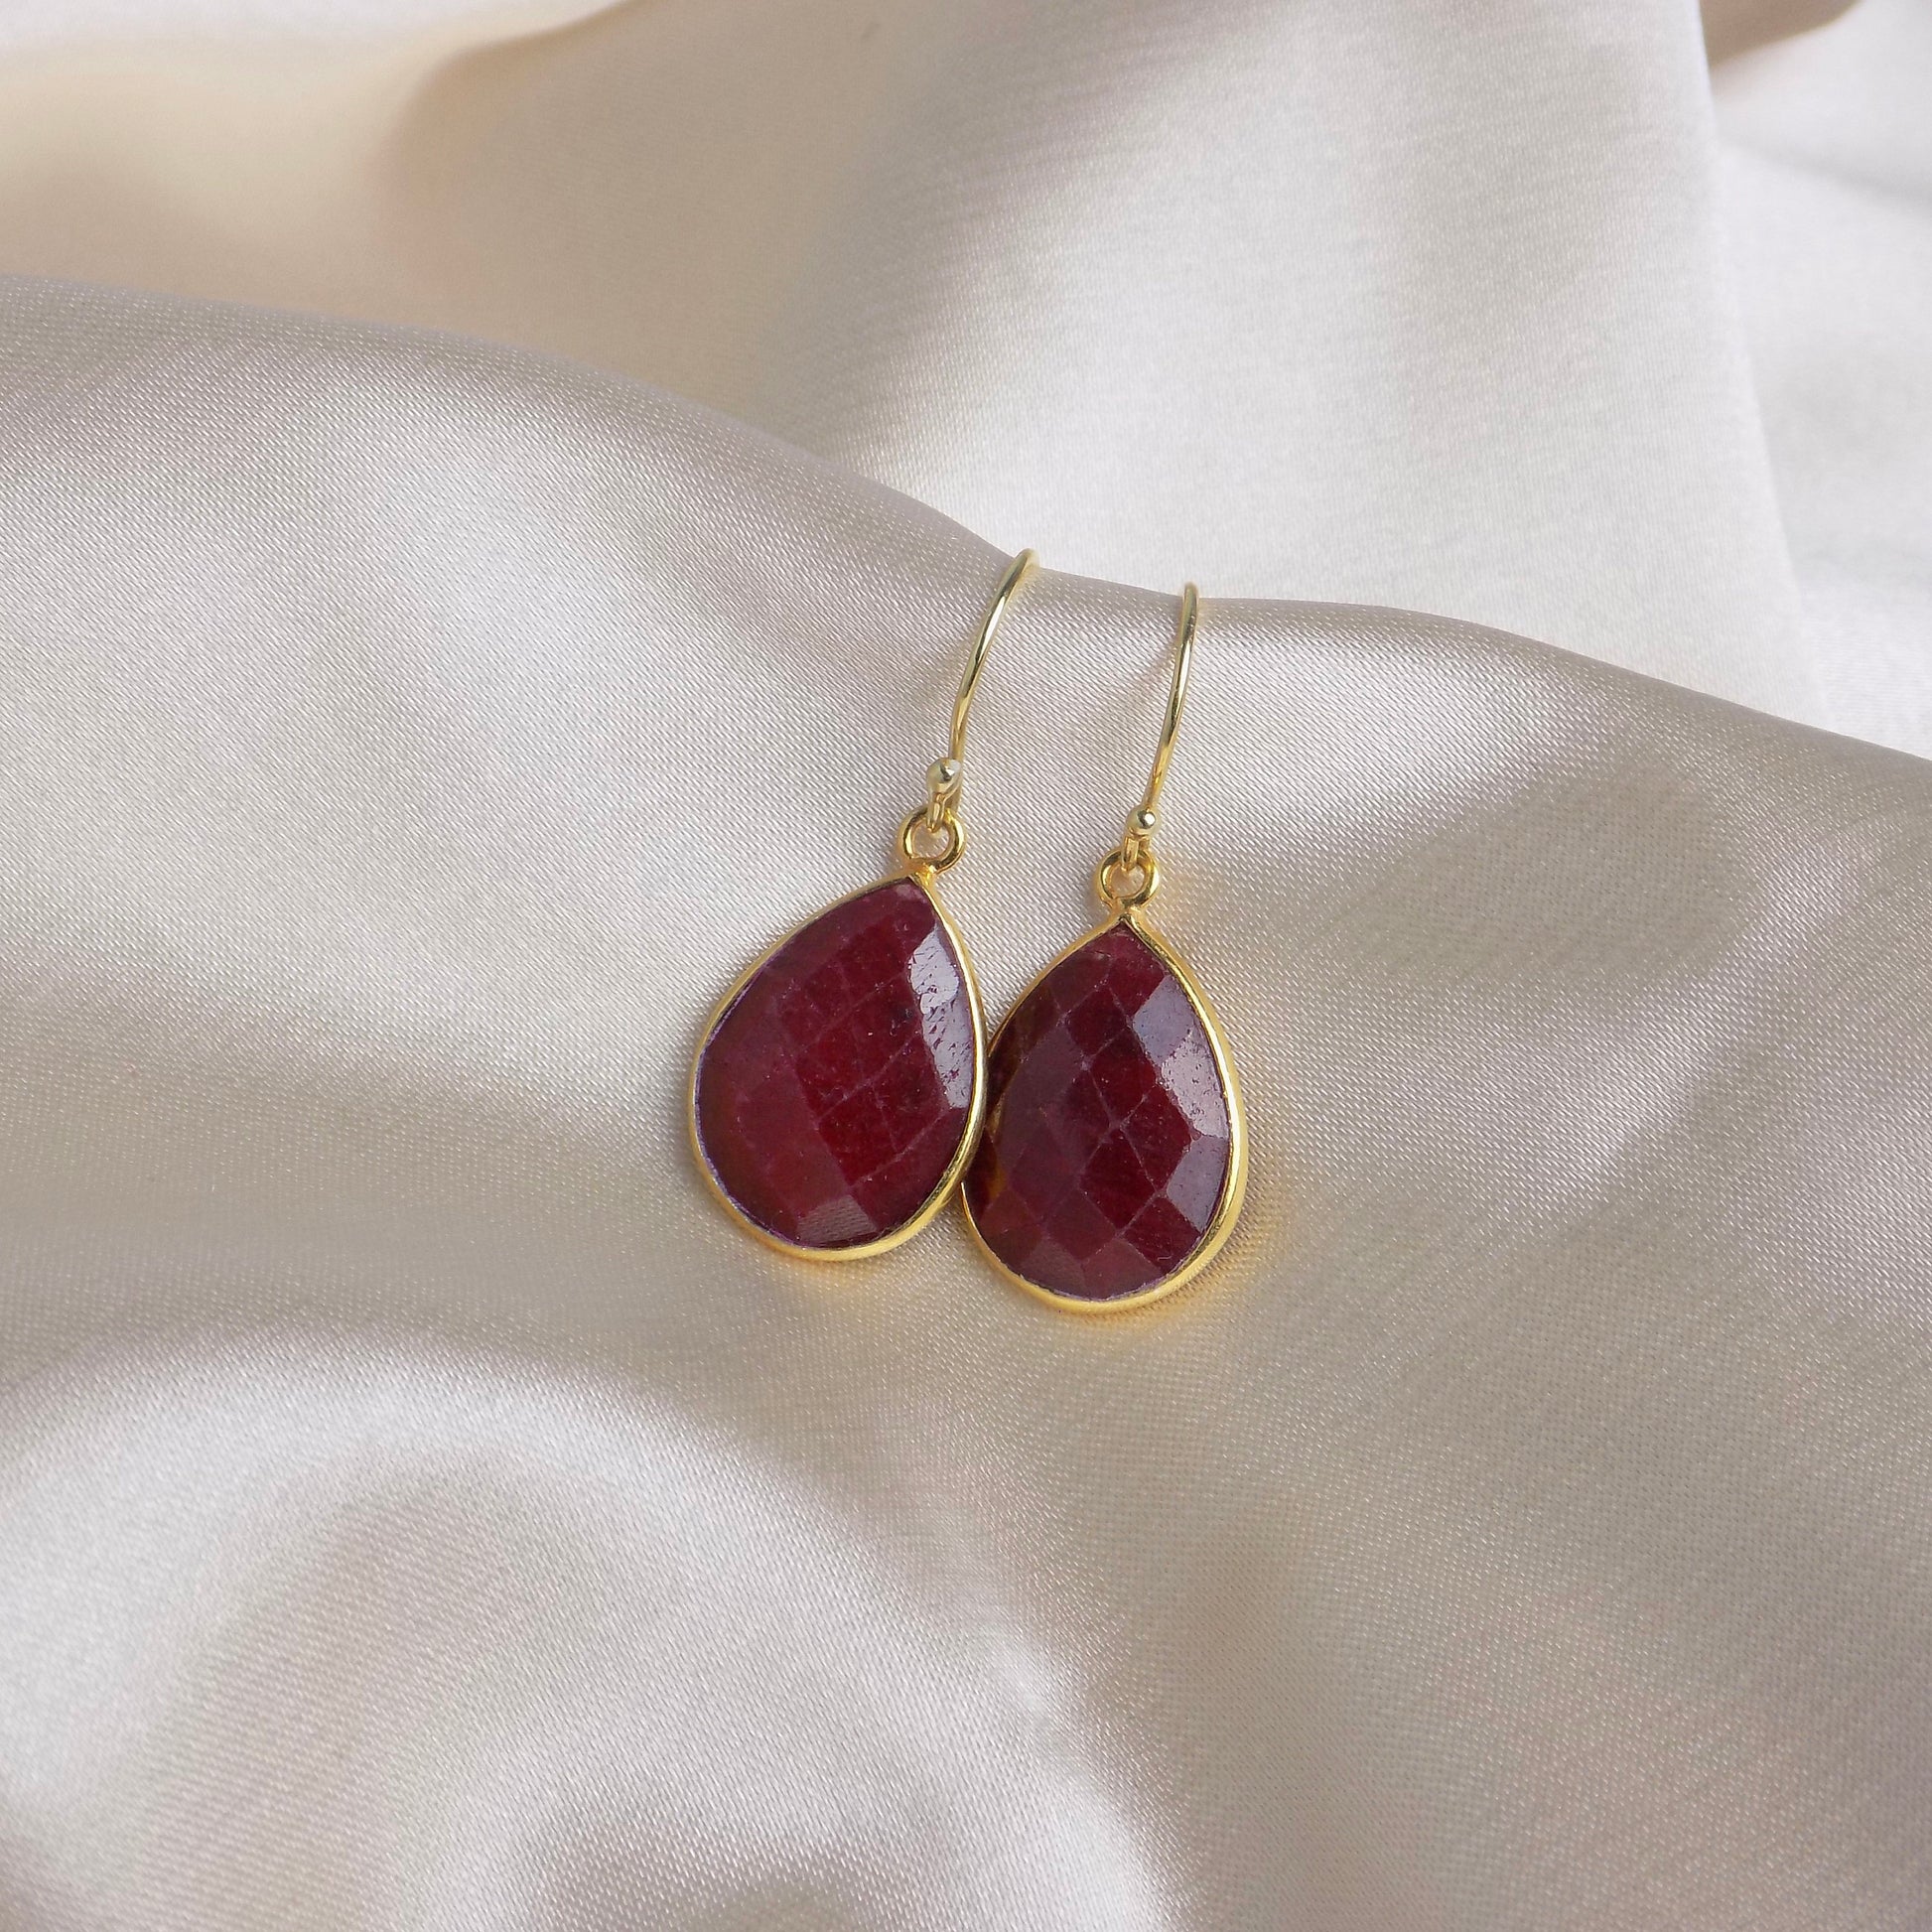 Ruby Drop Earrings Gold, Large Dark Red Pink Genuine Gemstone Earring, Gift For Wife, Gifts For Best Friend, M6-158